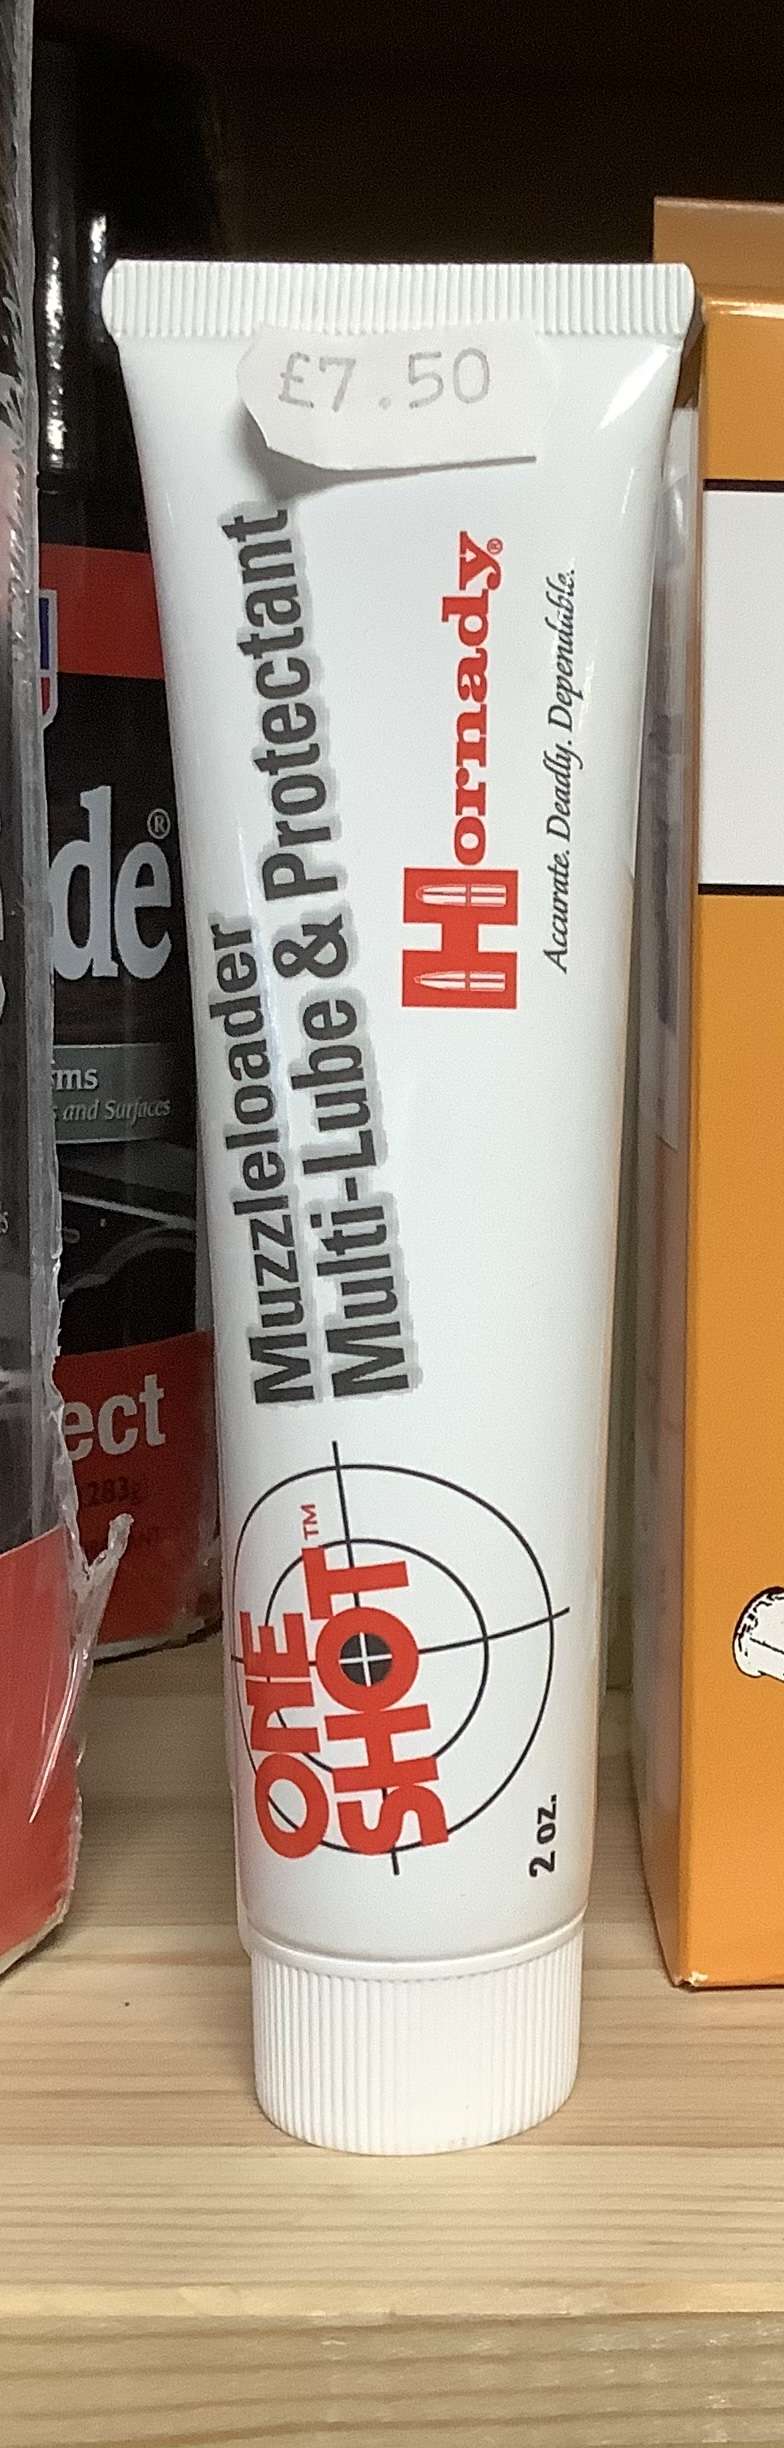 Hornady One Shot Muzzleloader Multi-lube and Protectant